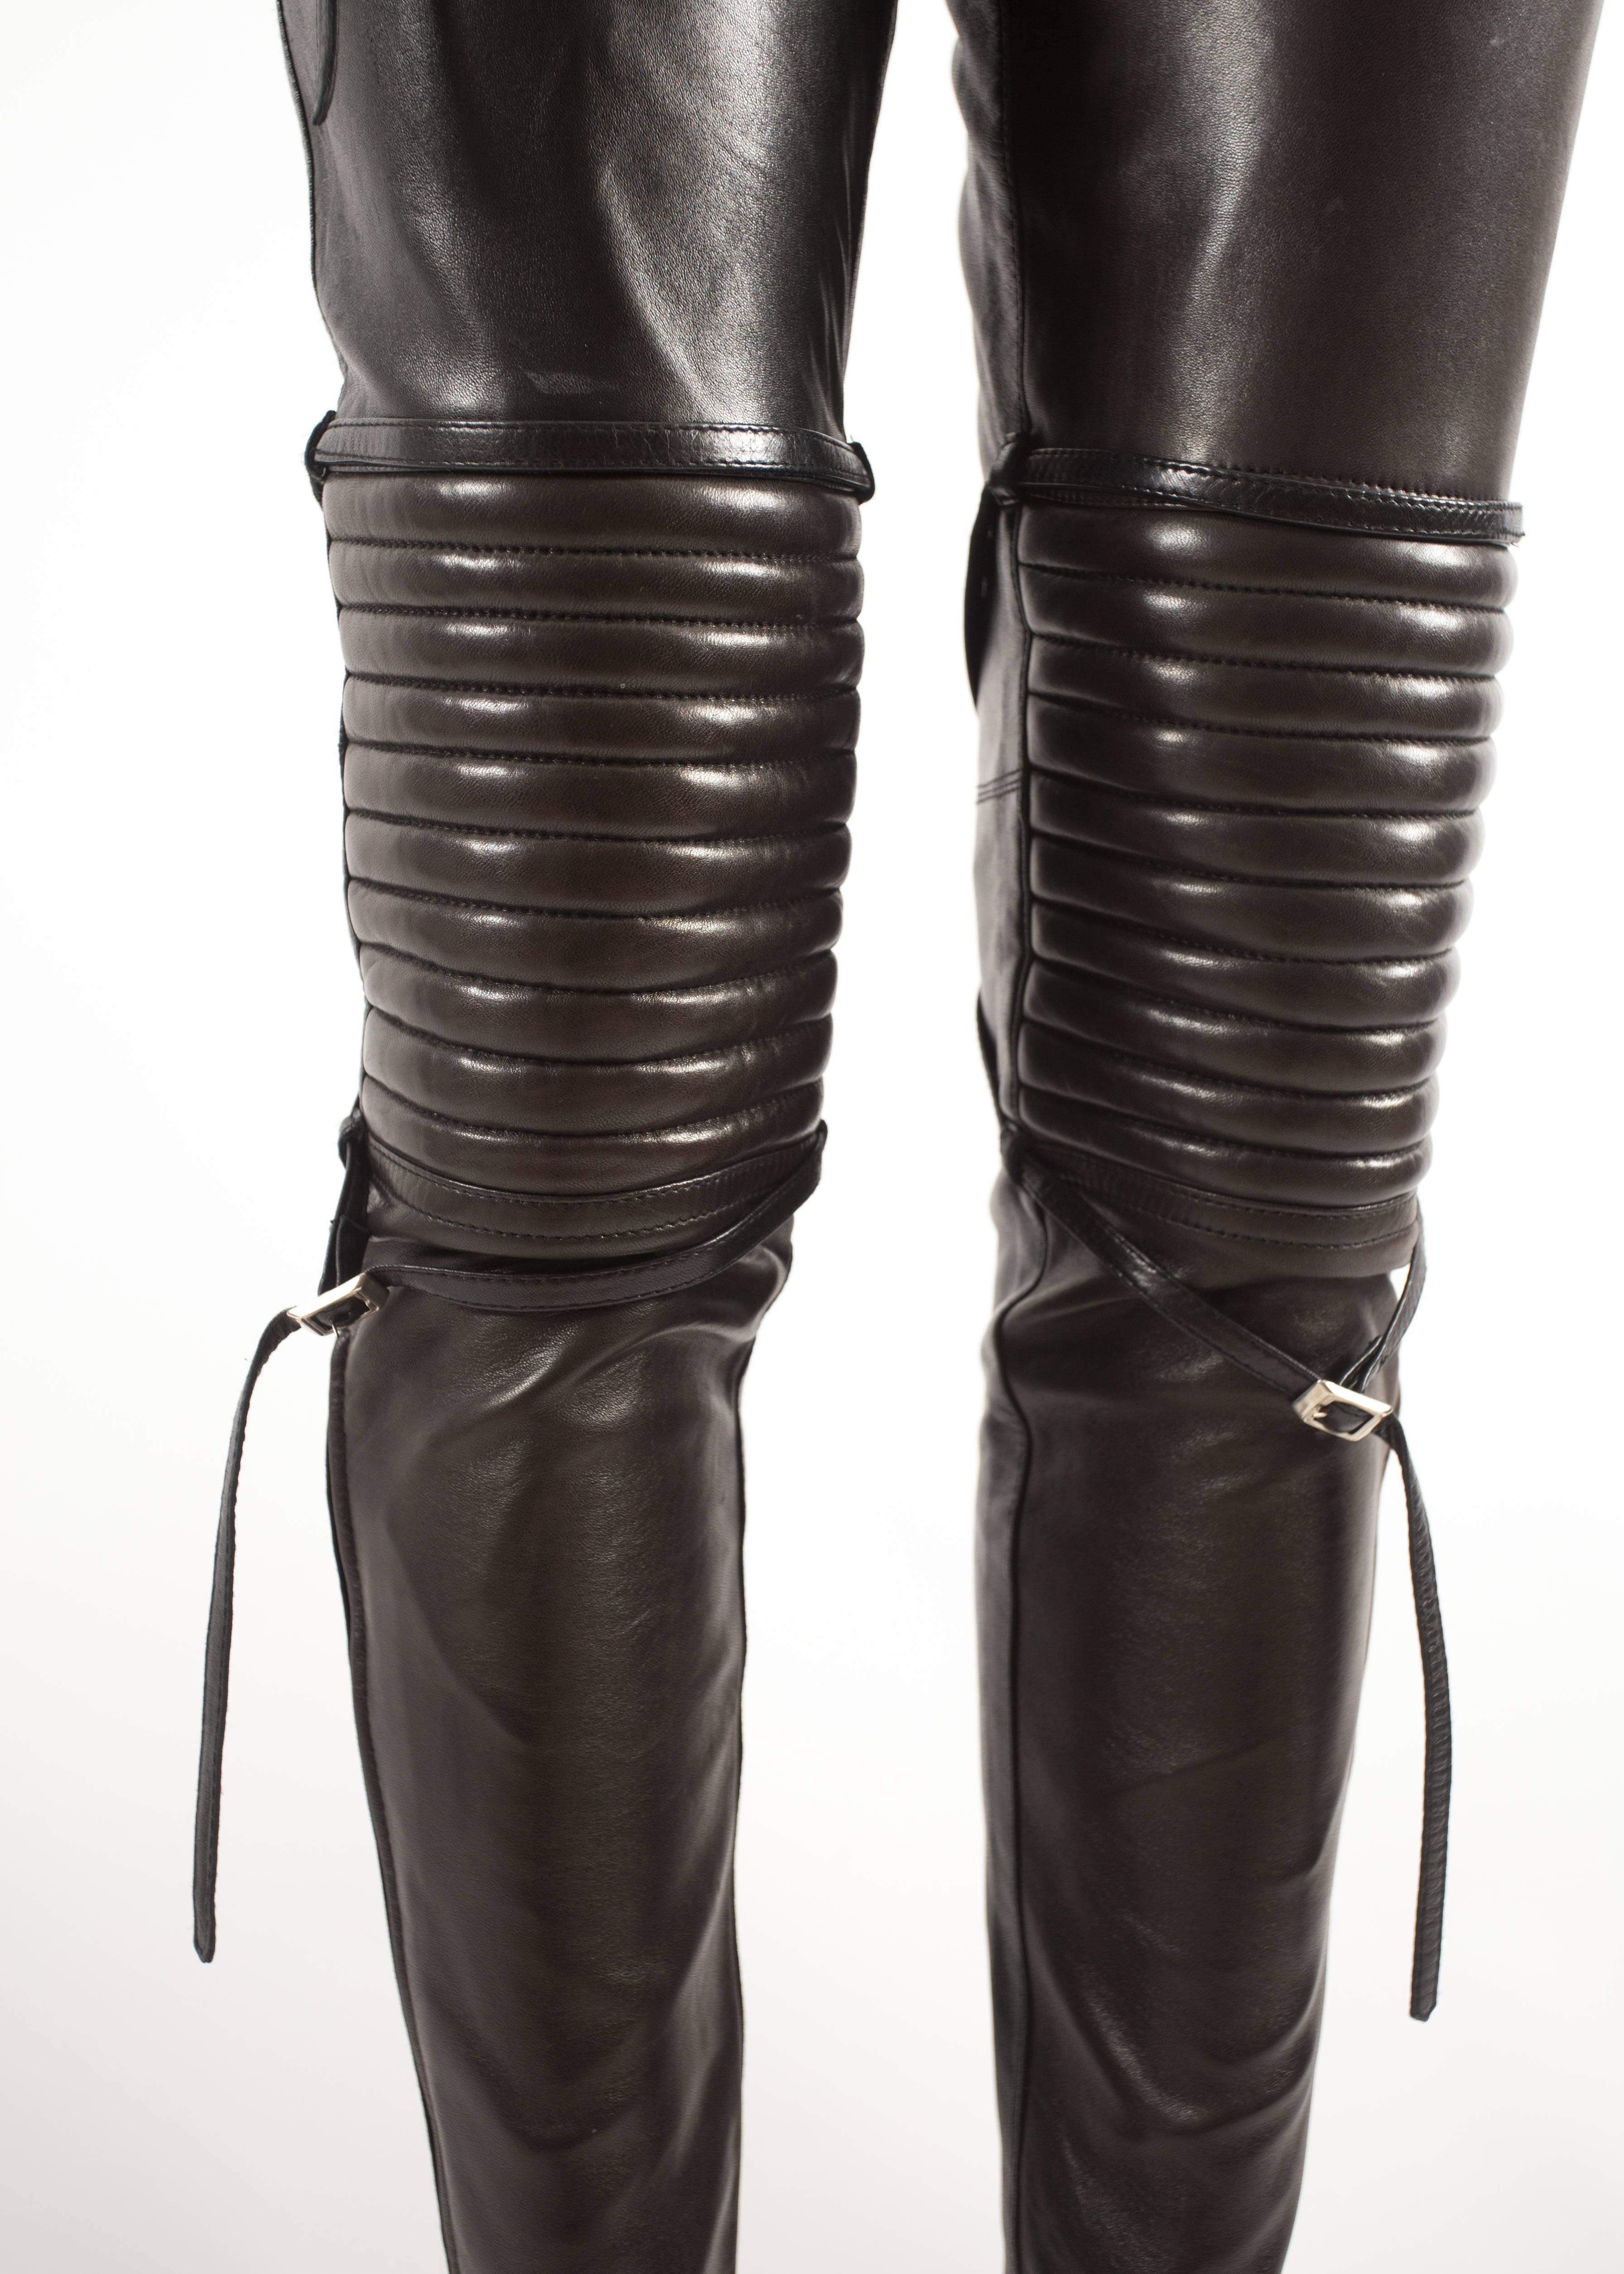 Jean Paul Gaultier Autumn-Winter 1990 black and brown leather biker pants with padding and bondage straps.